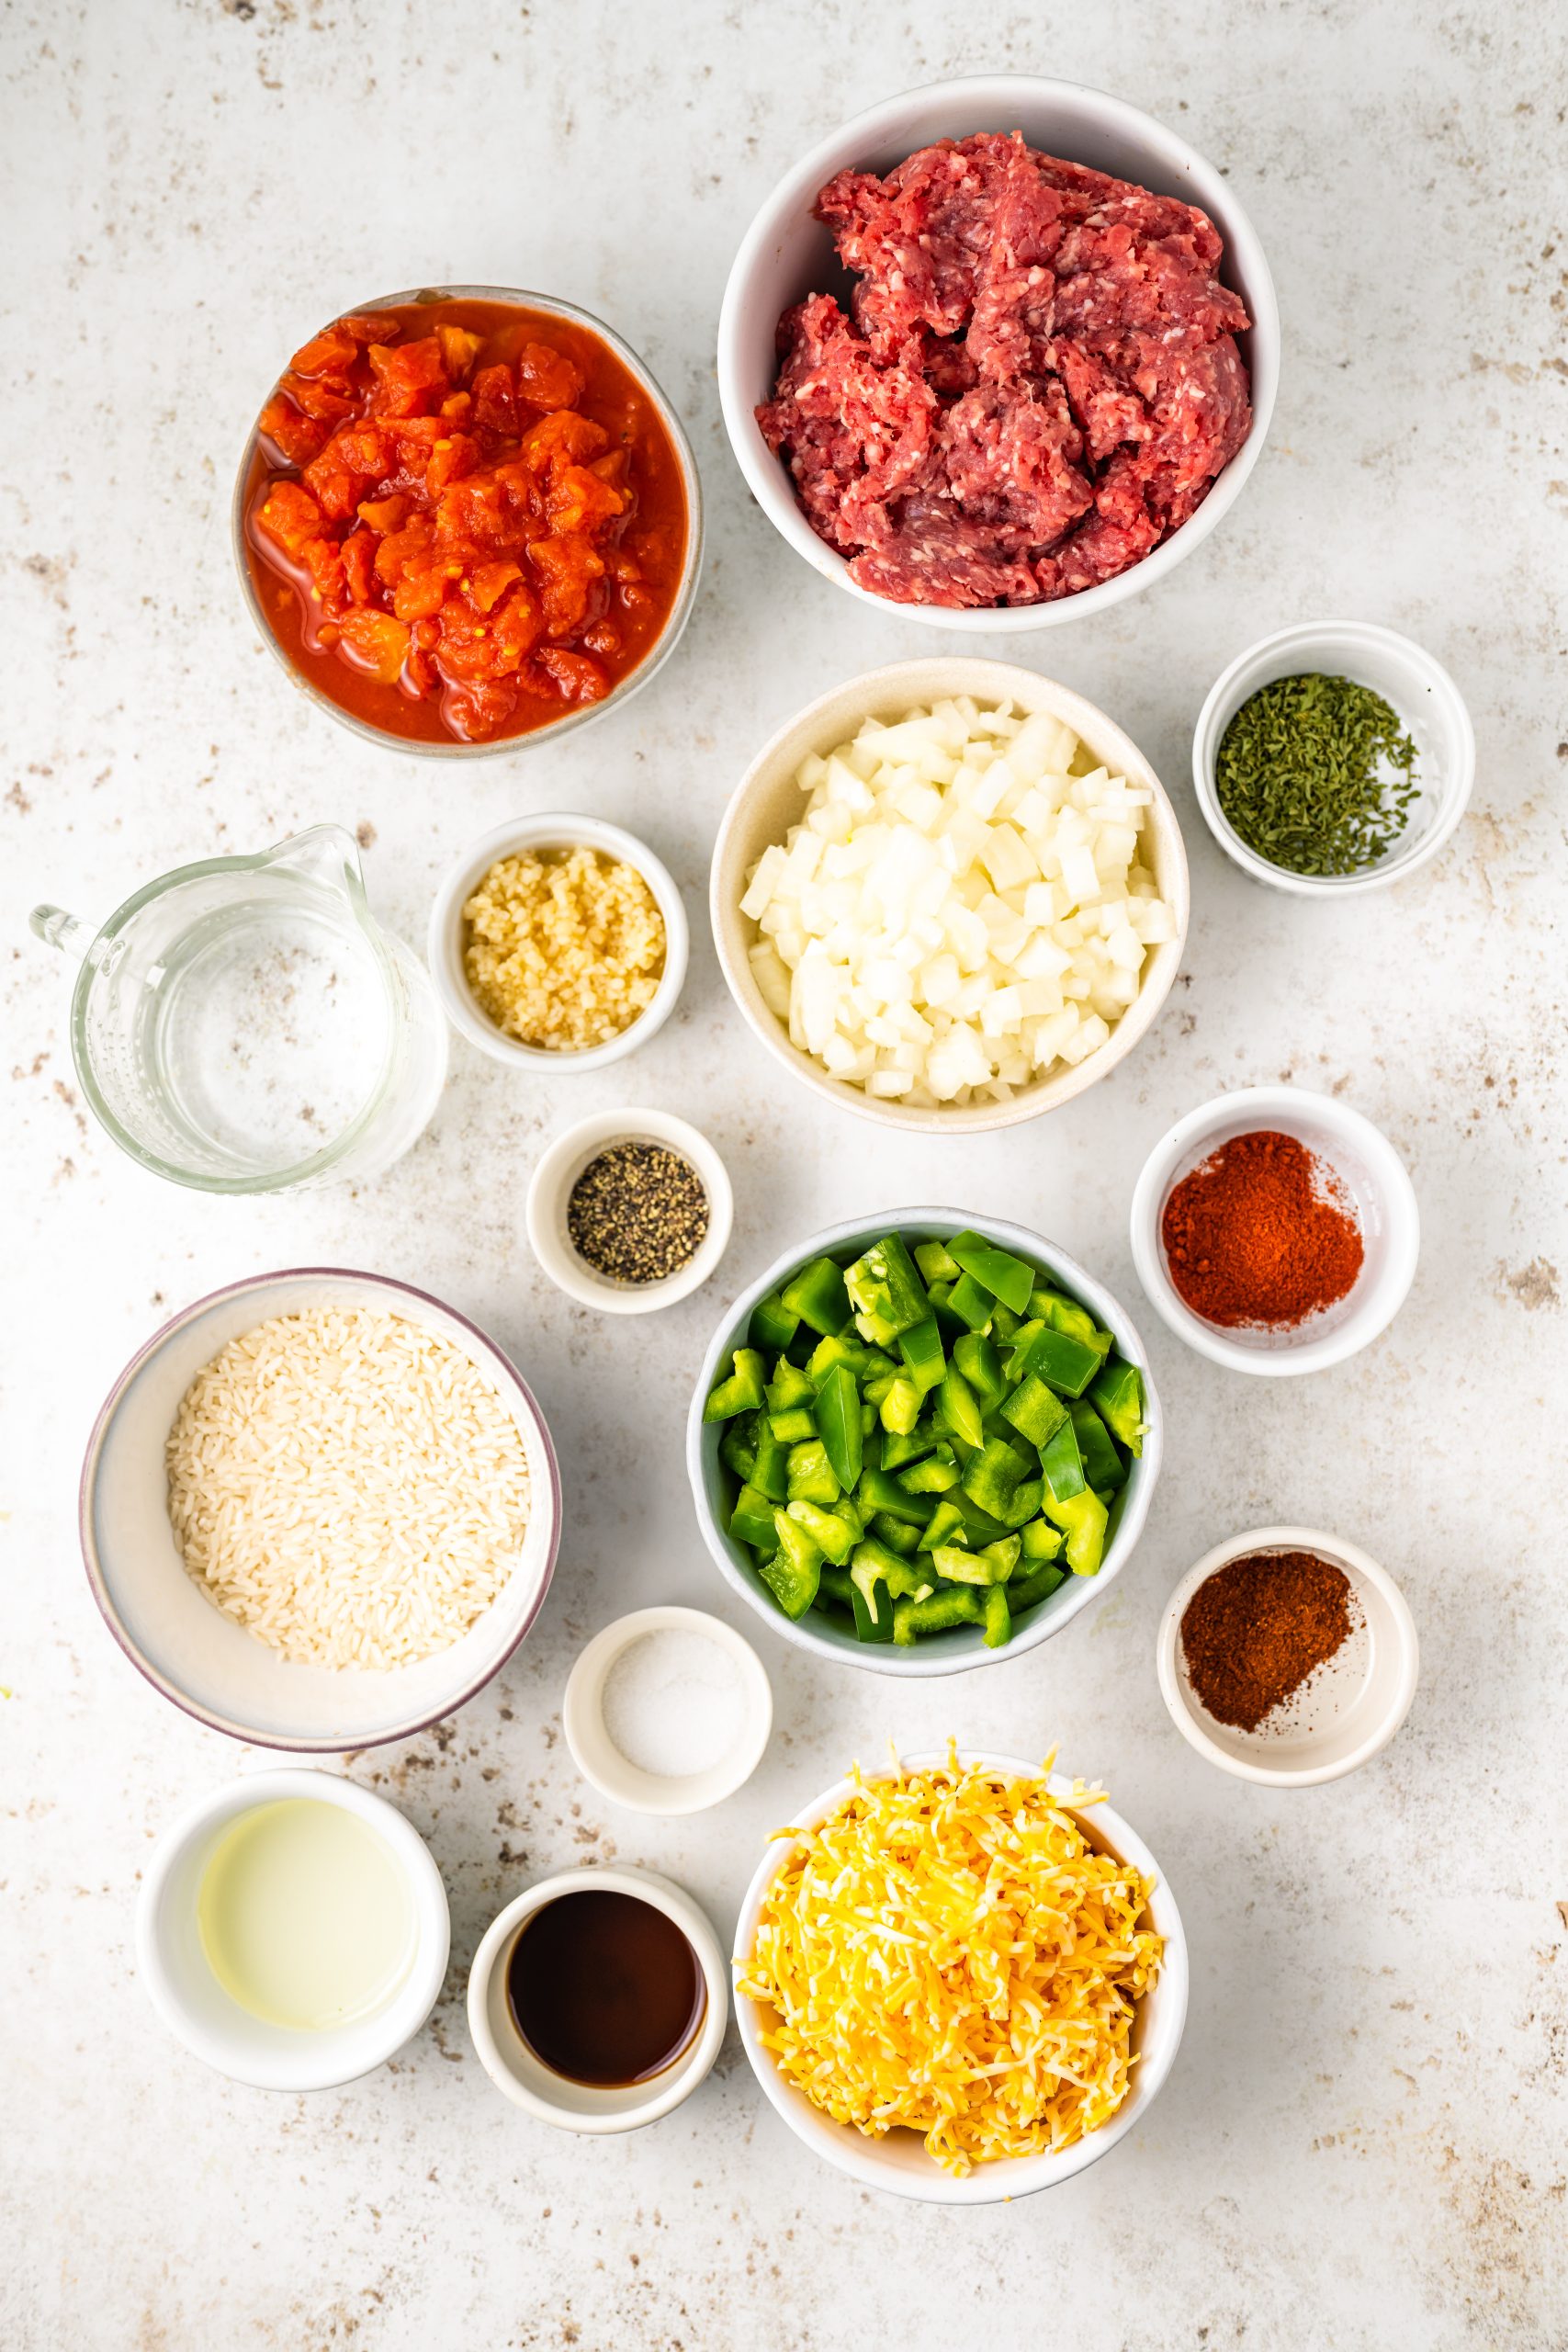 A bowl of ingredients for meatballs on a white background, including cheddar and beef.